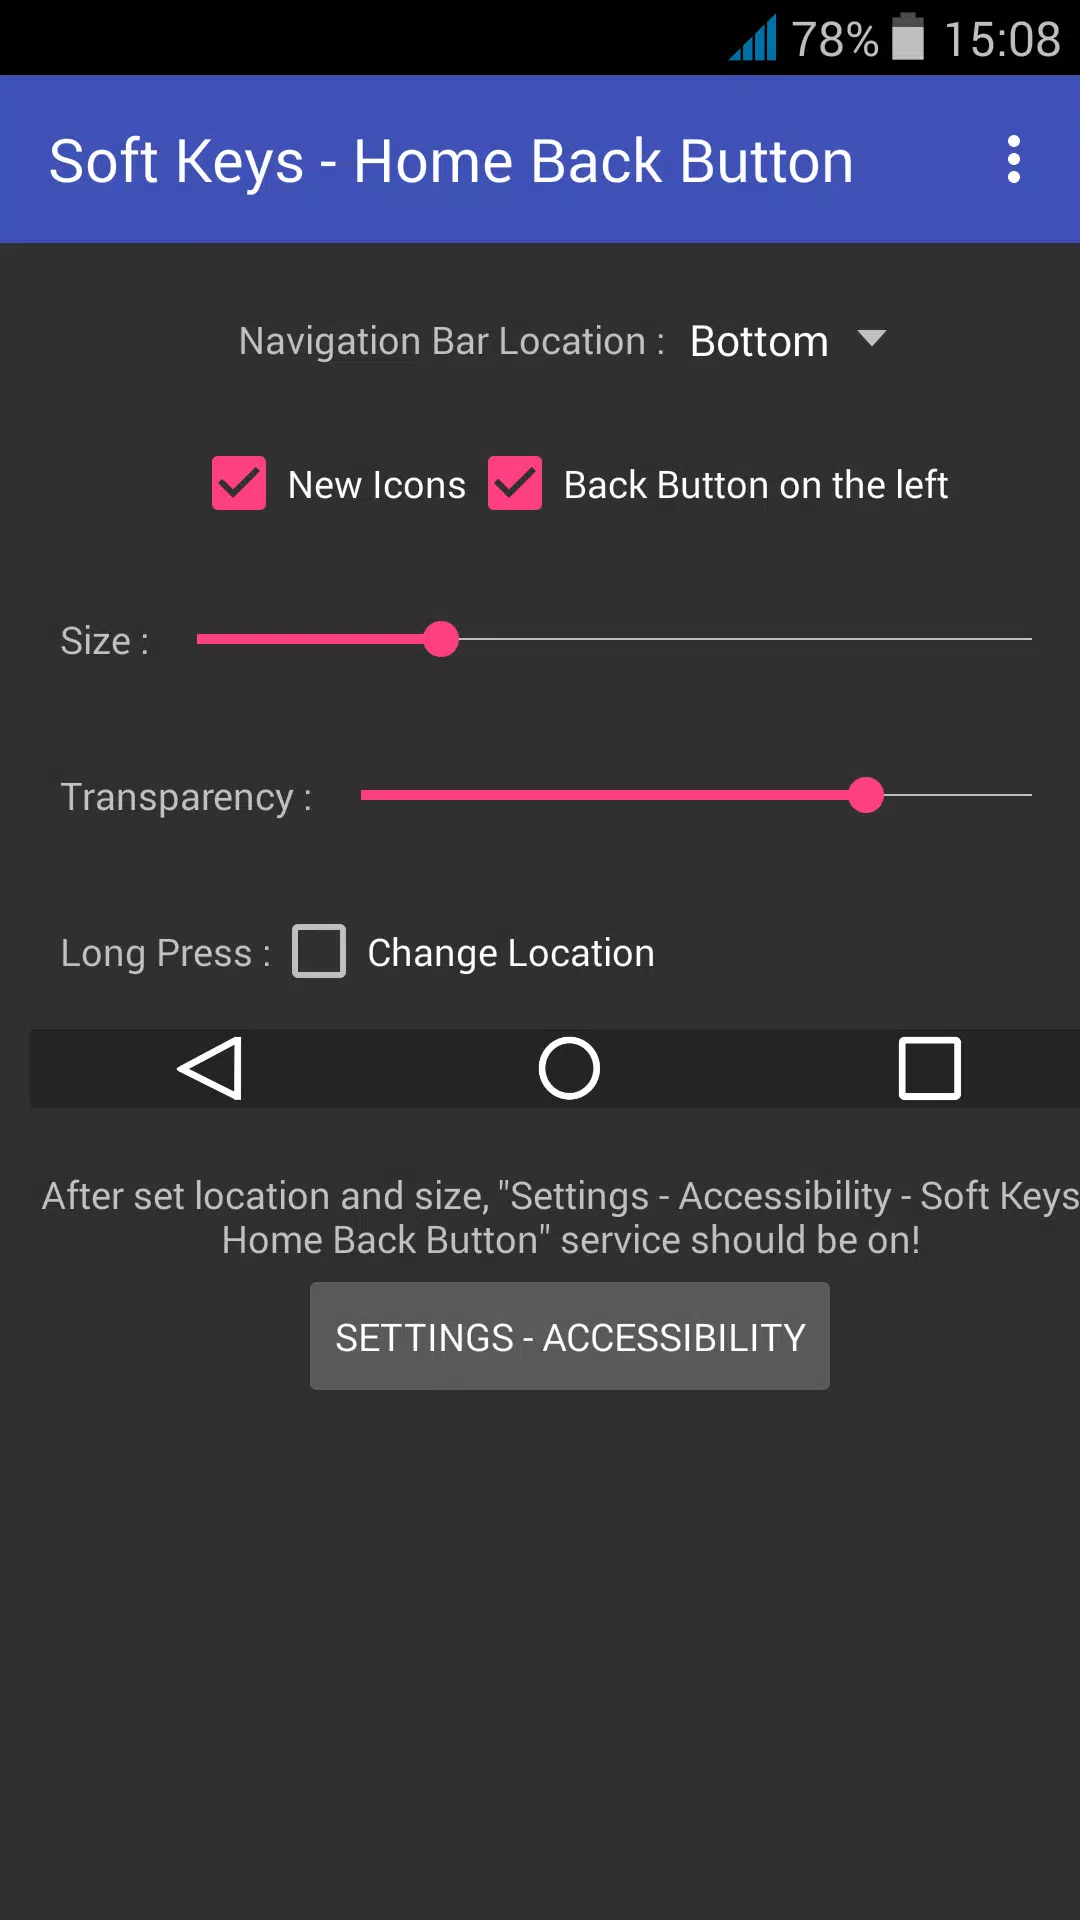 Soft Keys - Home Back Button for Android - APK Download